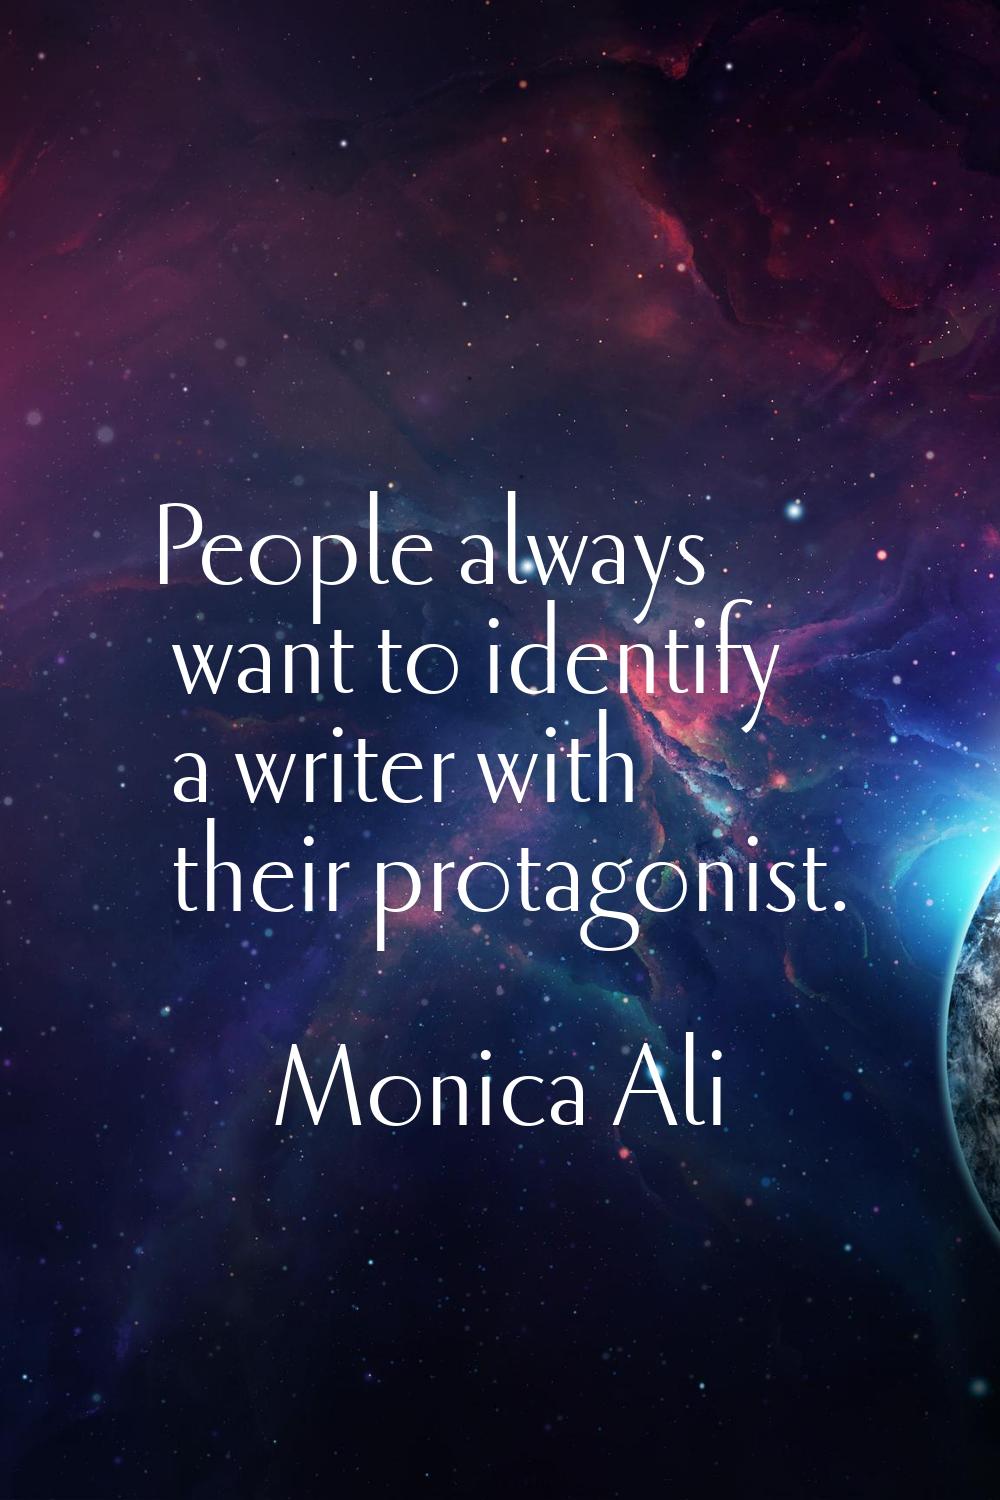 People always want to identify a writer with their protagonist.